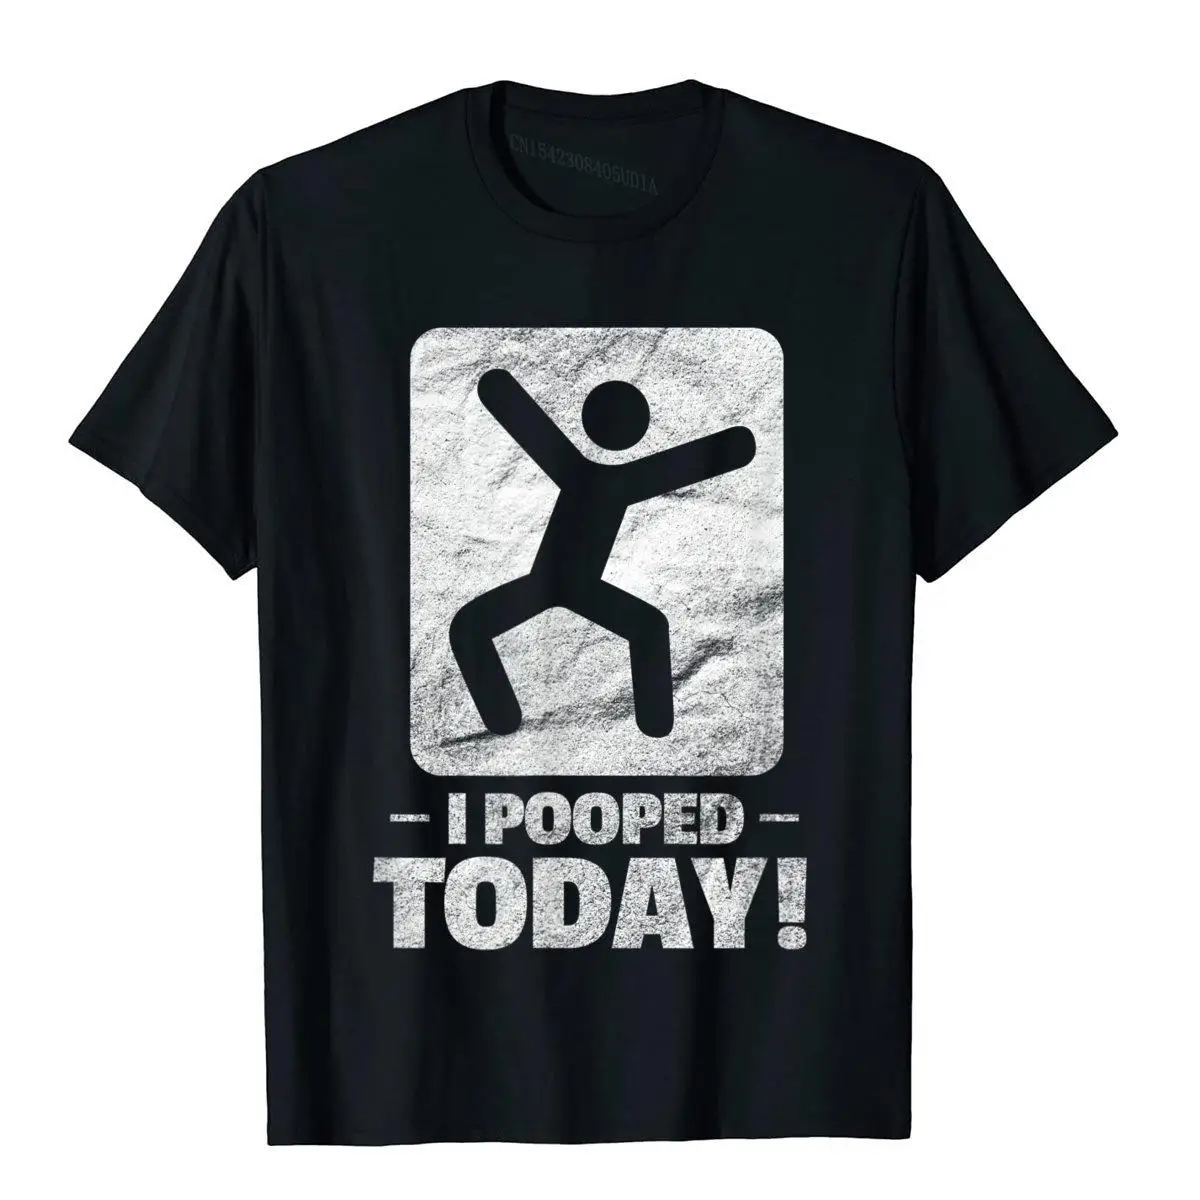 I Pooped Today Adult Humor Funny Saying Sarcastic T-Shirt__A11709black